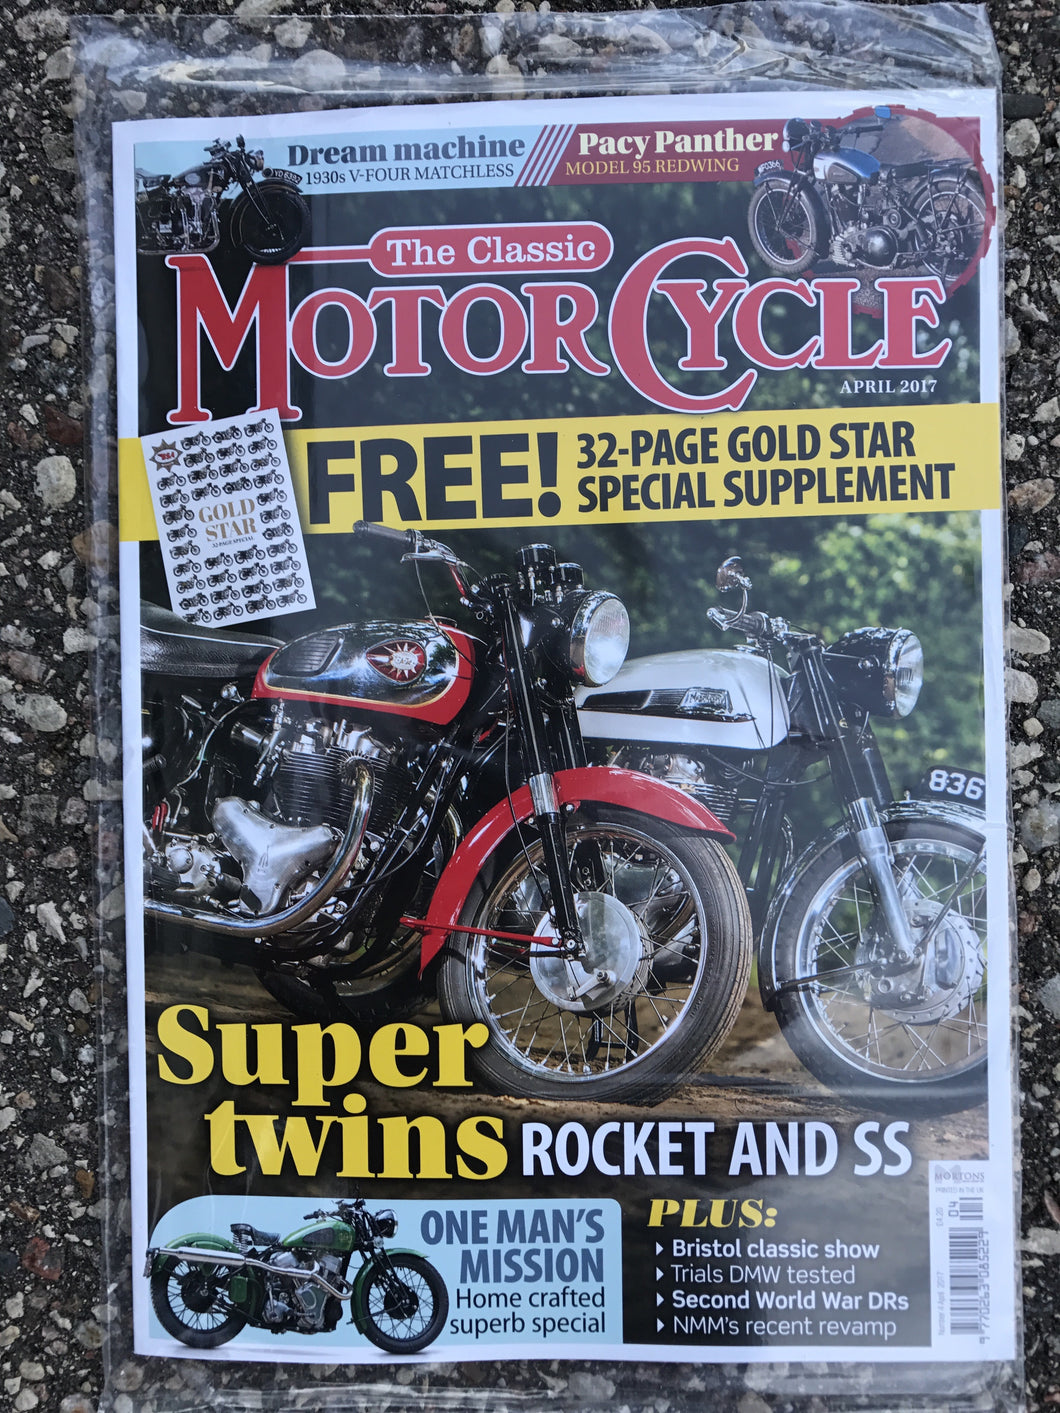 TCM201704 The Classic Motorcycle April 2017